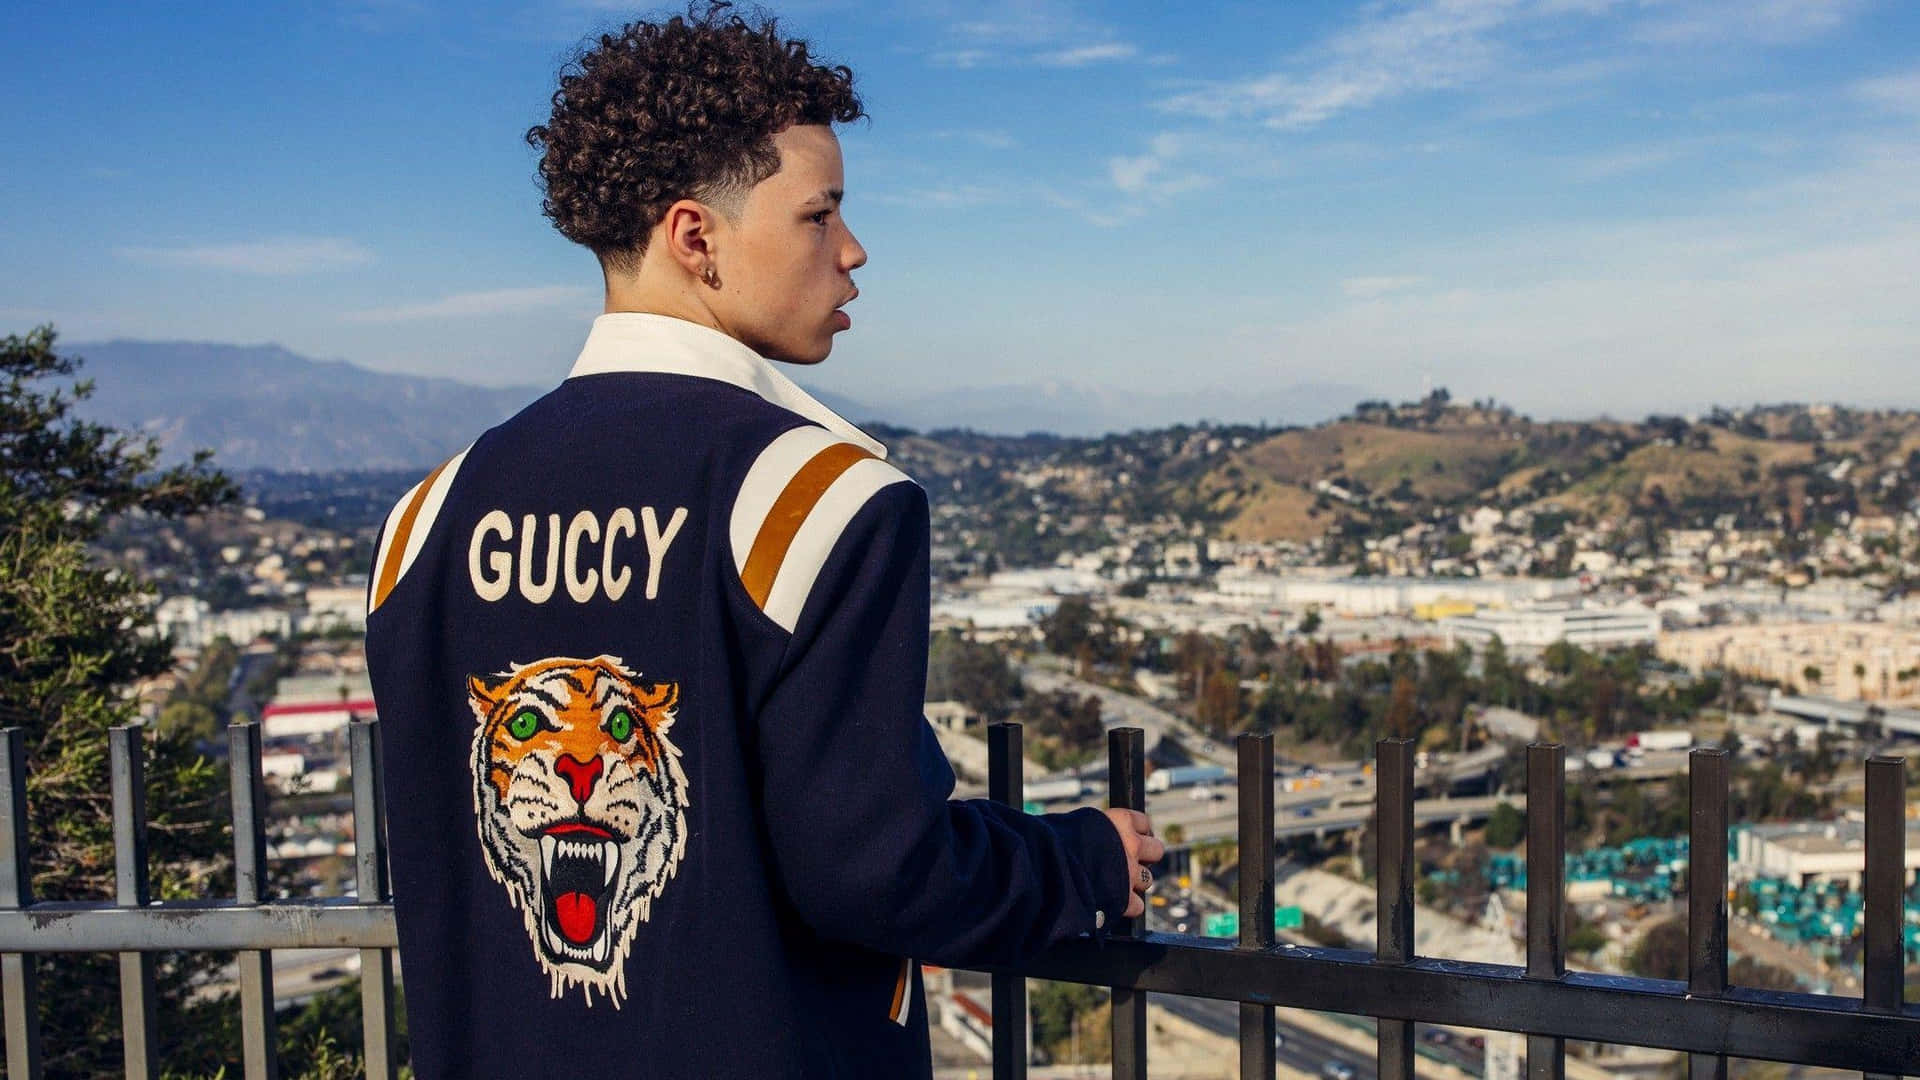 Lil Mosey exuding confidence as he stands in front of a sea of people Wallpaper